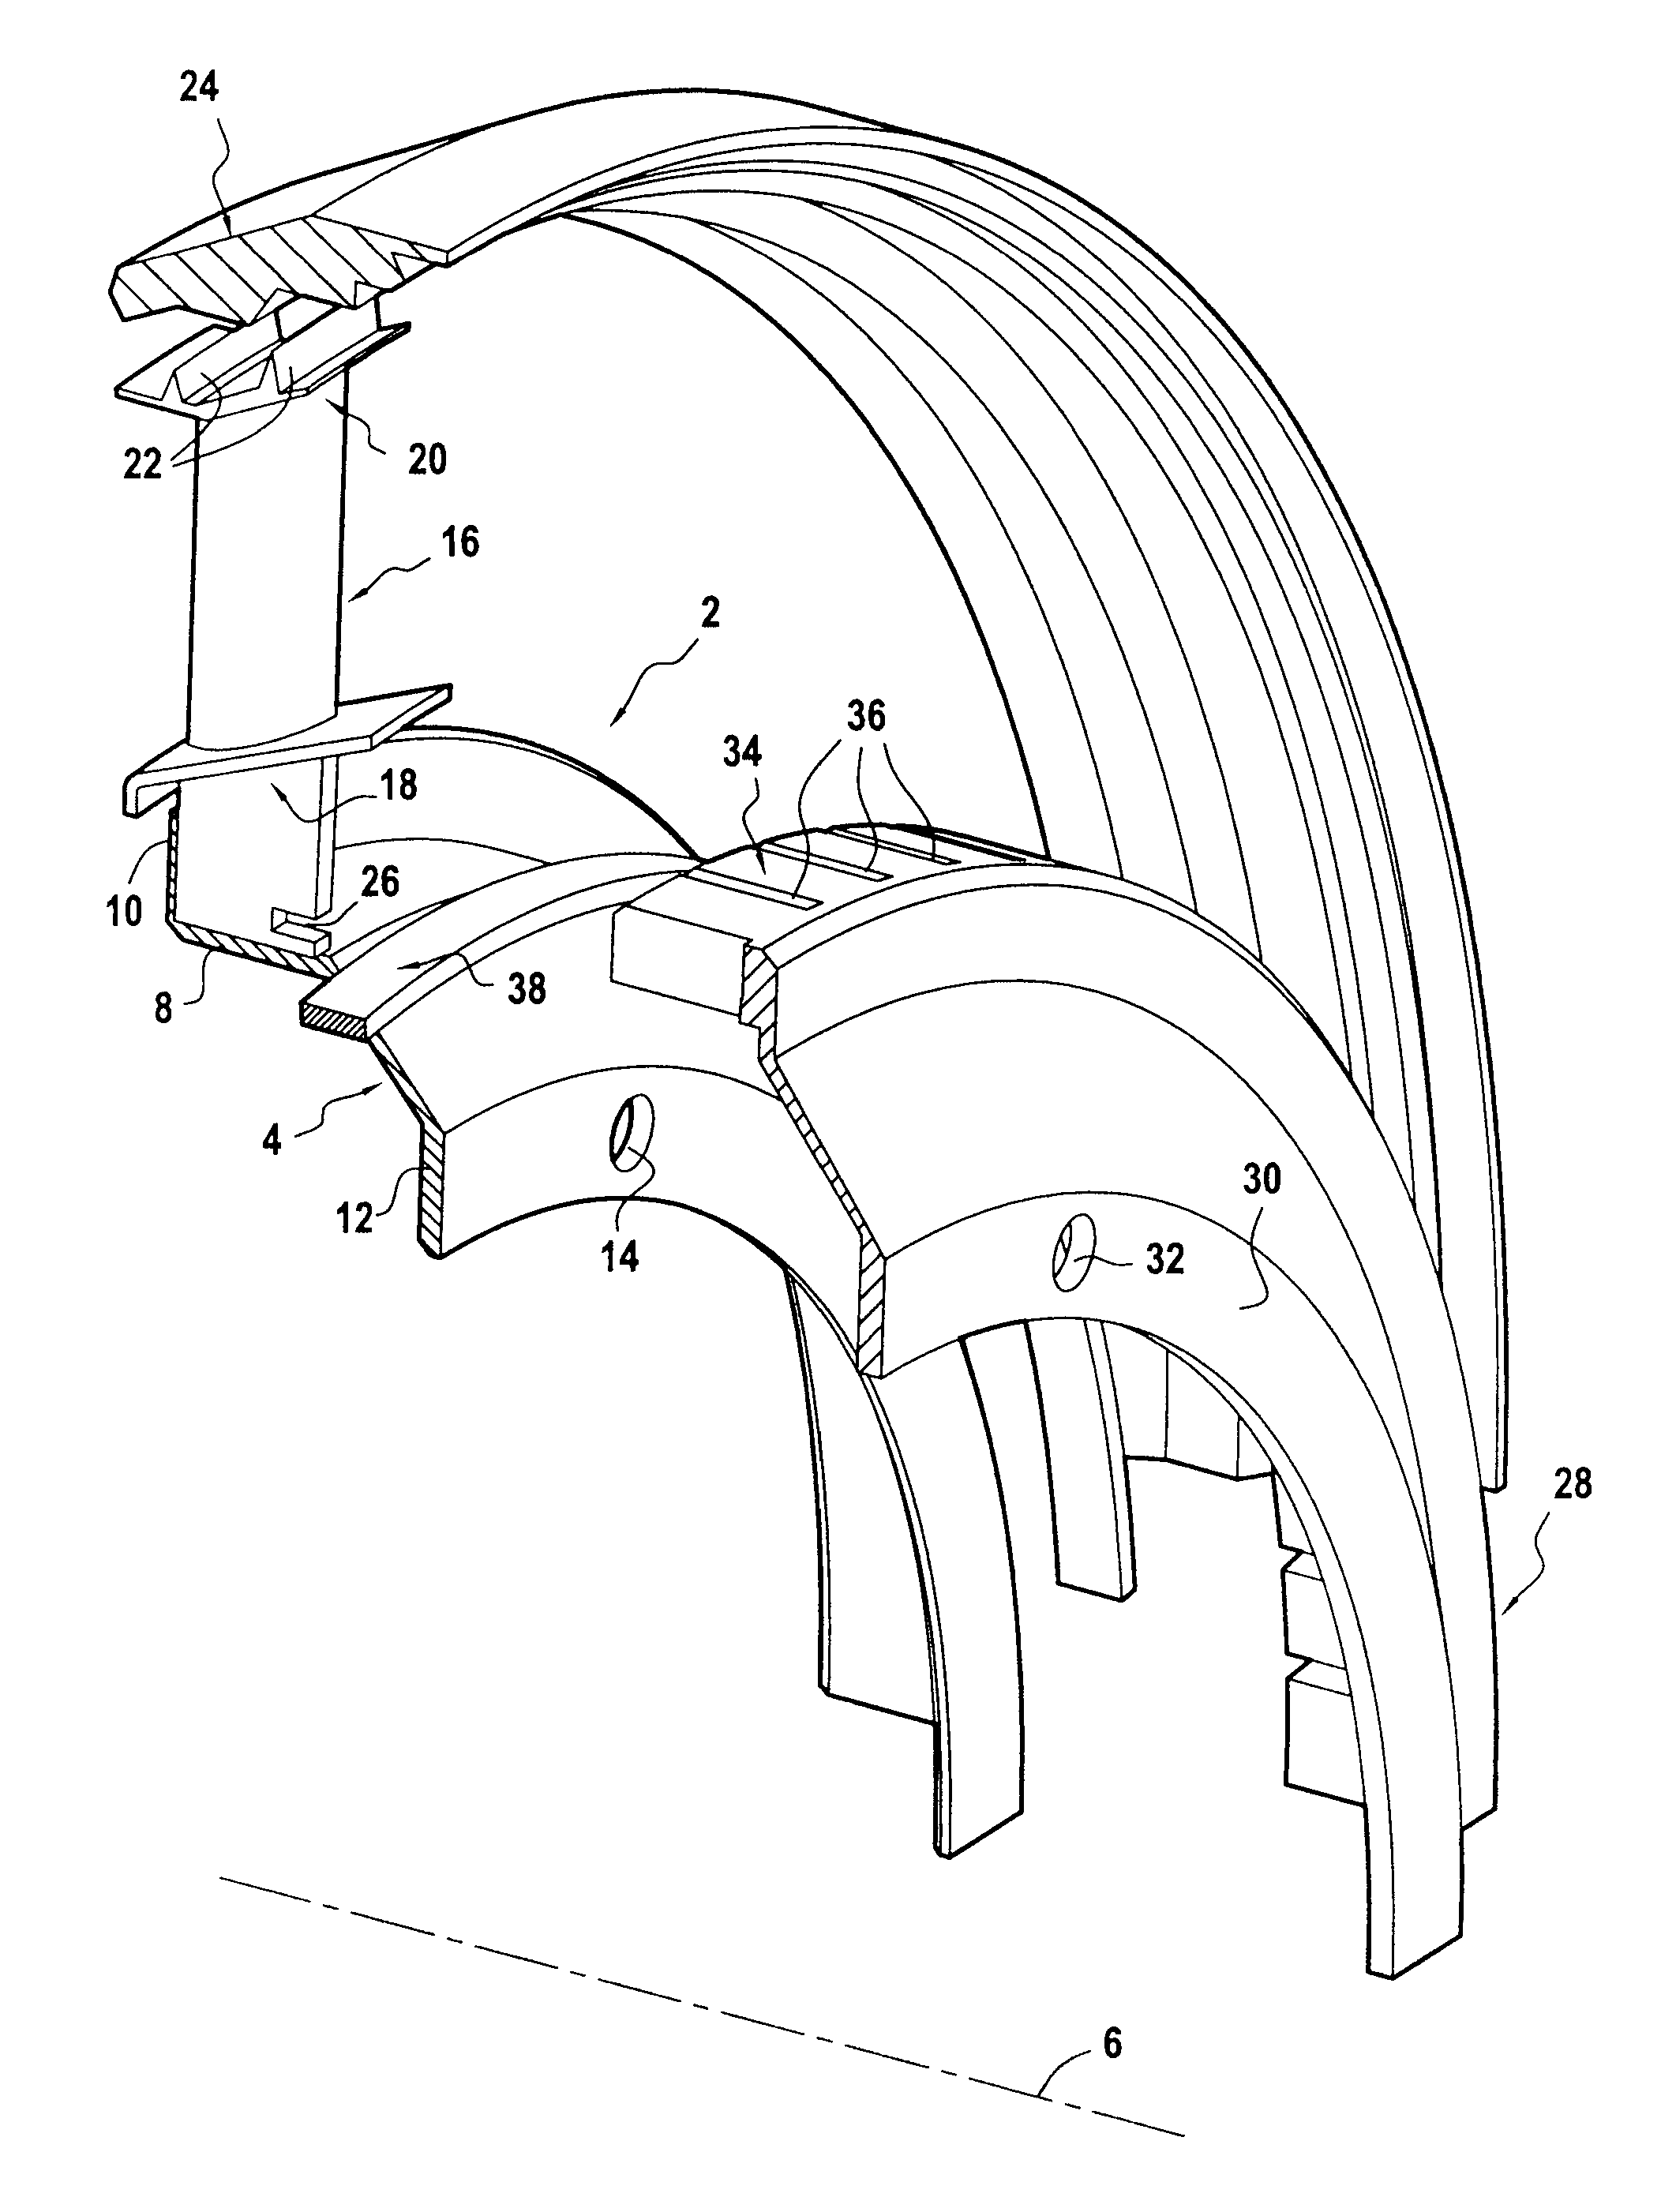 Turbine engine rotor wheel with blades made of a composite material provided with a spring ring